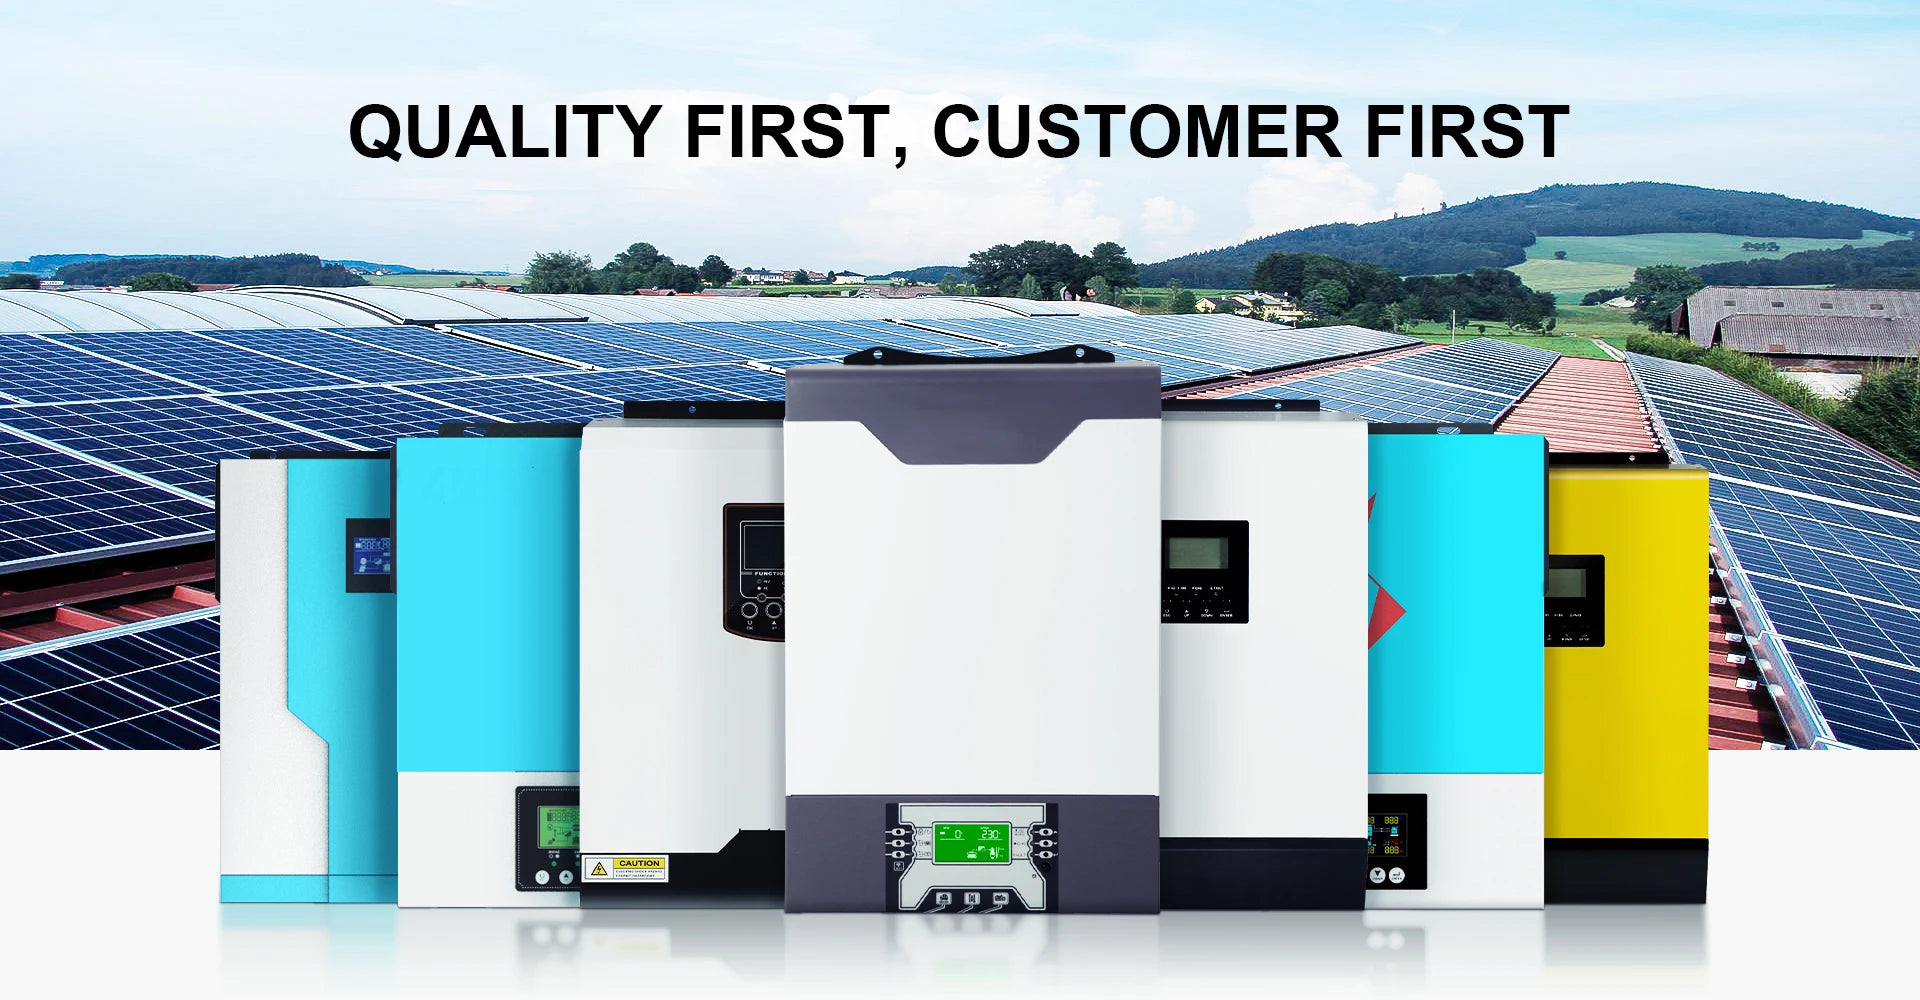 DAXTROMN 3.6KW 6.2KW Hybrid Solar Inverter, Quality first, customer satisfaction guaranteed. 100% reliable performance.